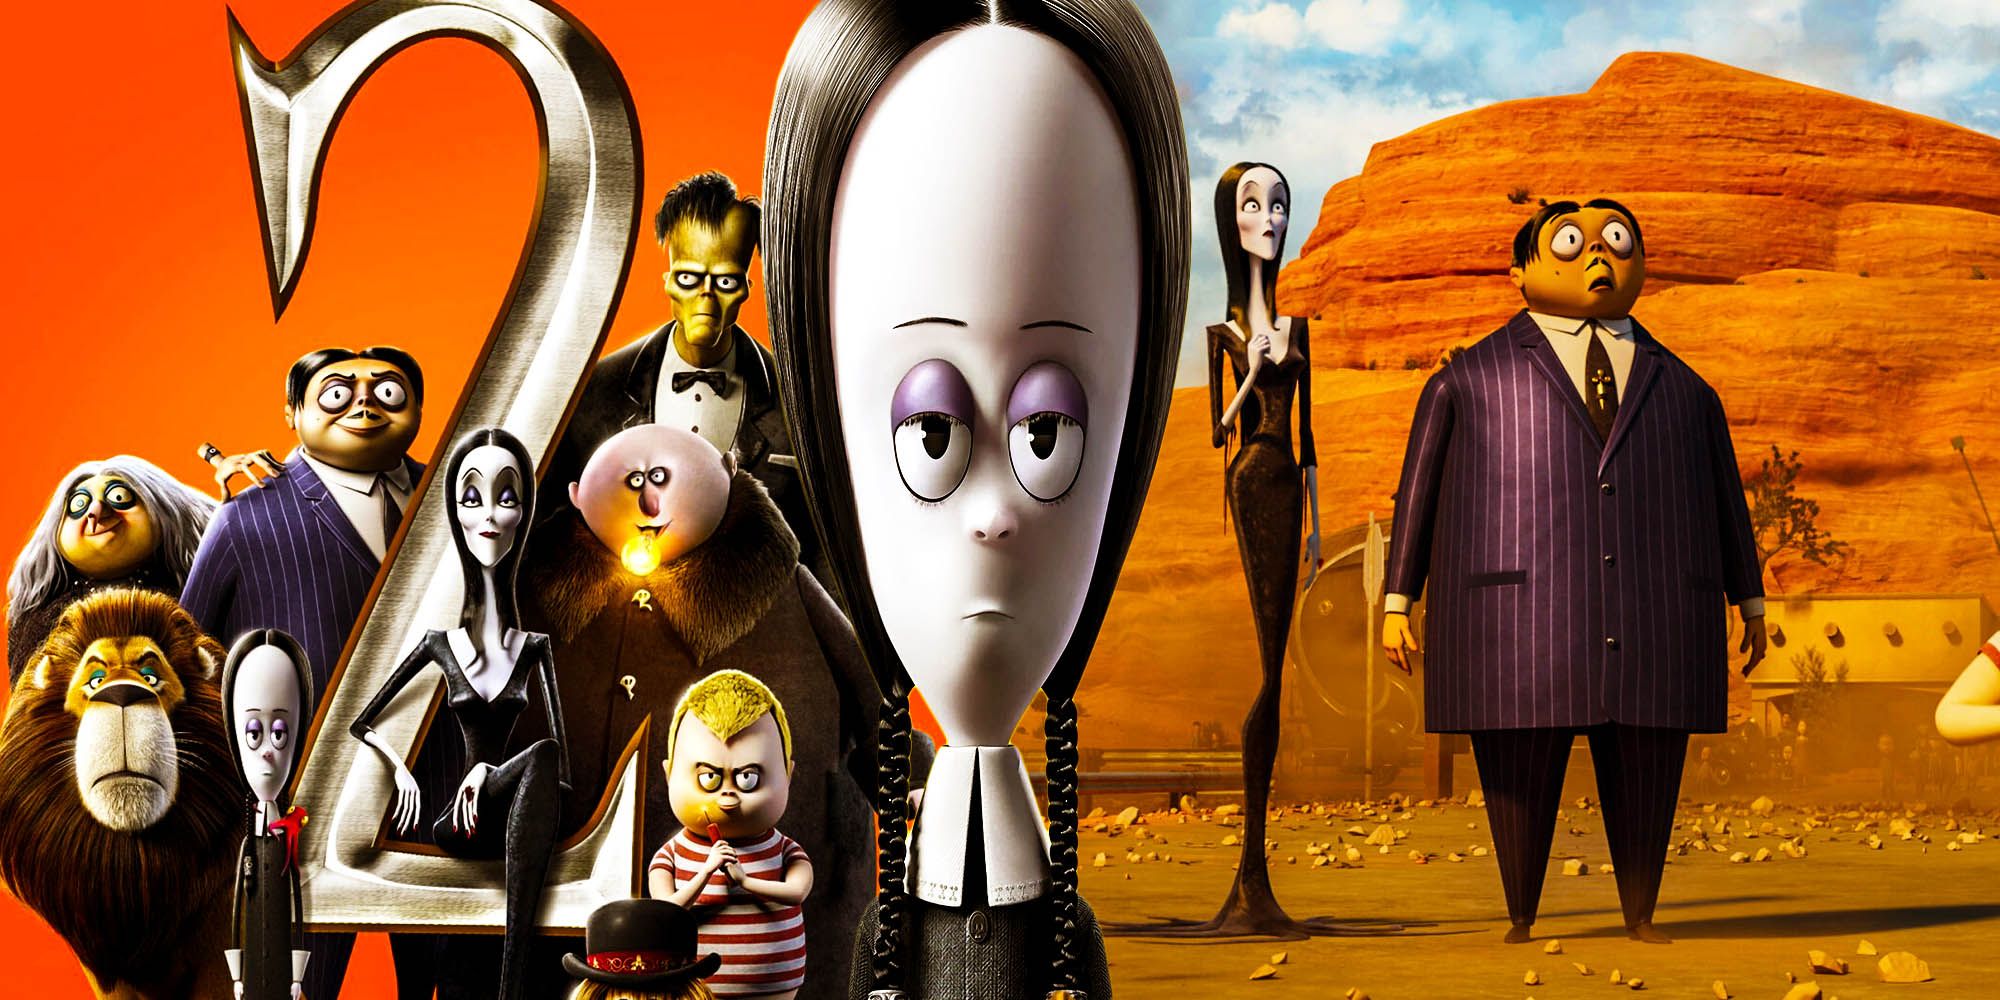 How To Watch Addams Family 2 Online